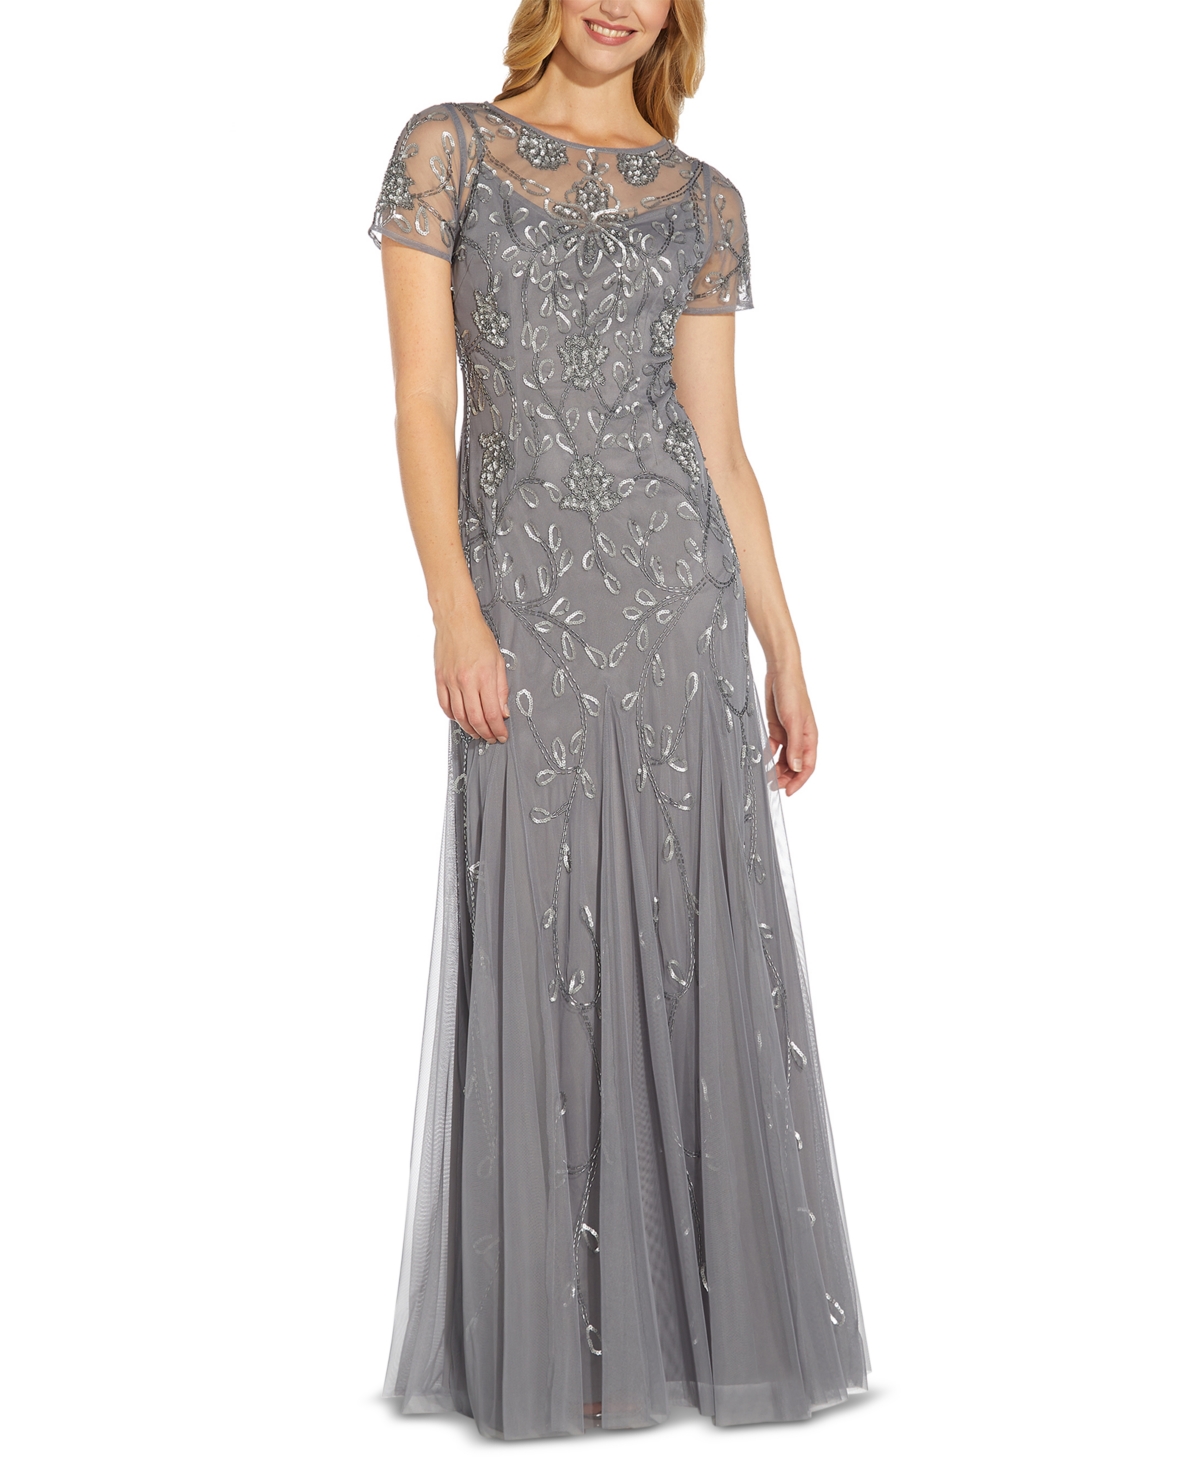 Edwardian Fashion, Clothing & Costumes 1900 – 1910s Adrianna Papell Beaded Gown $279.00 AT vintagedancer.com